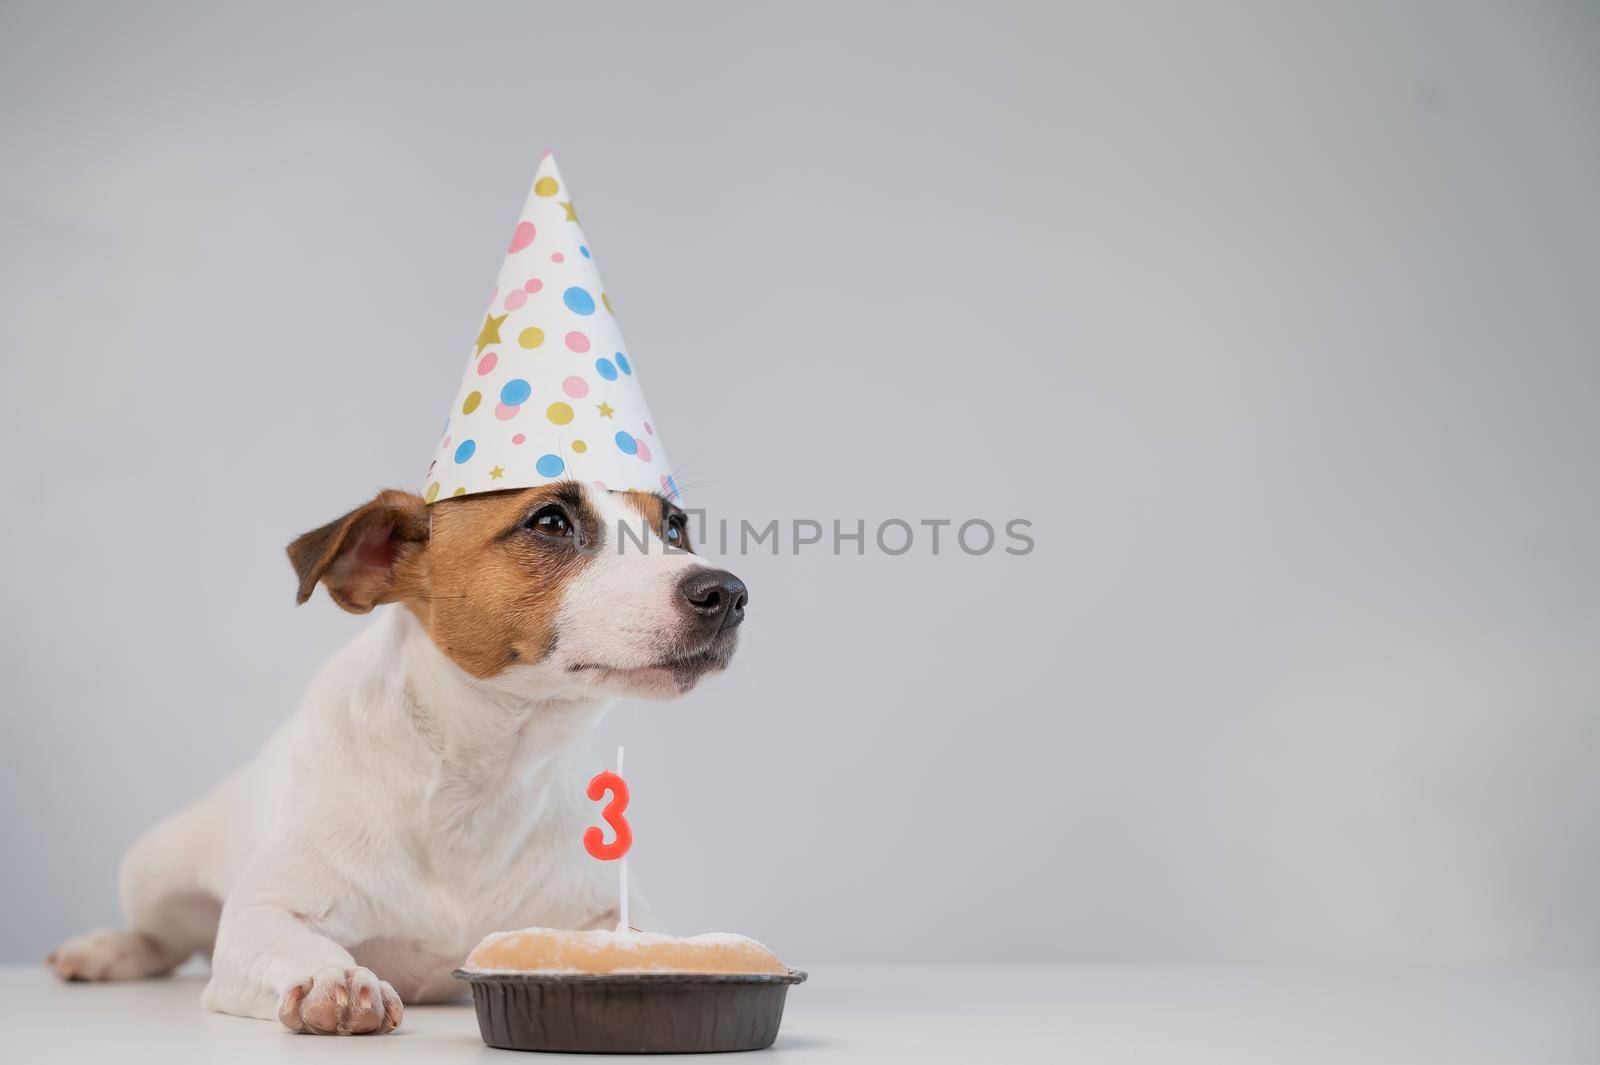 Jack russell terrier in a festive cap by a pie with a candle on a white background. The dog is celebrating its third birthday by mrwed54